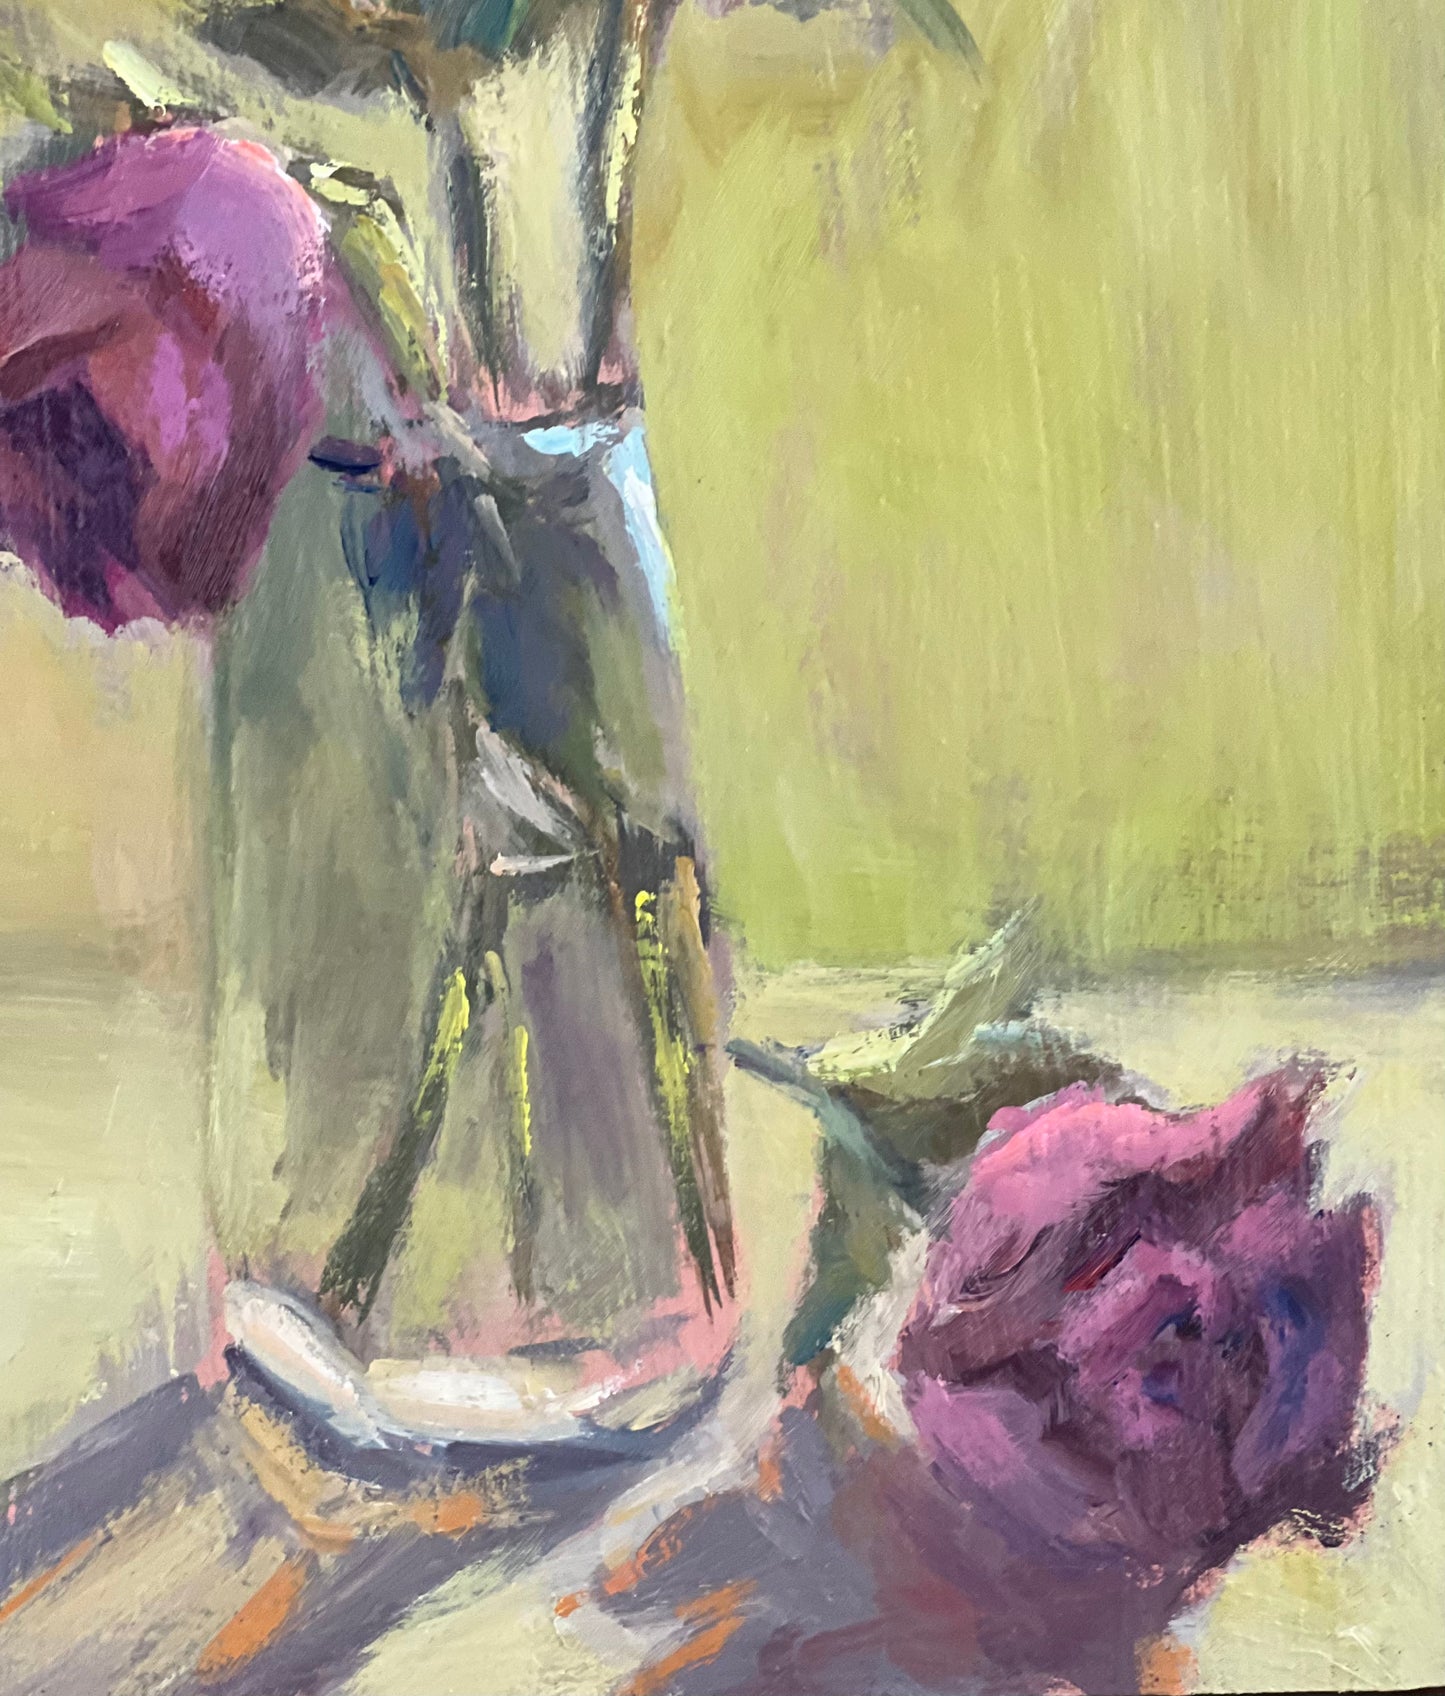 Oil Painting of Roses - Pink wilting roses by the window